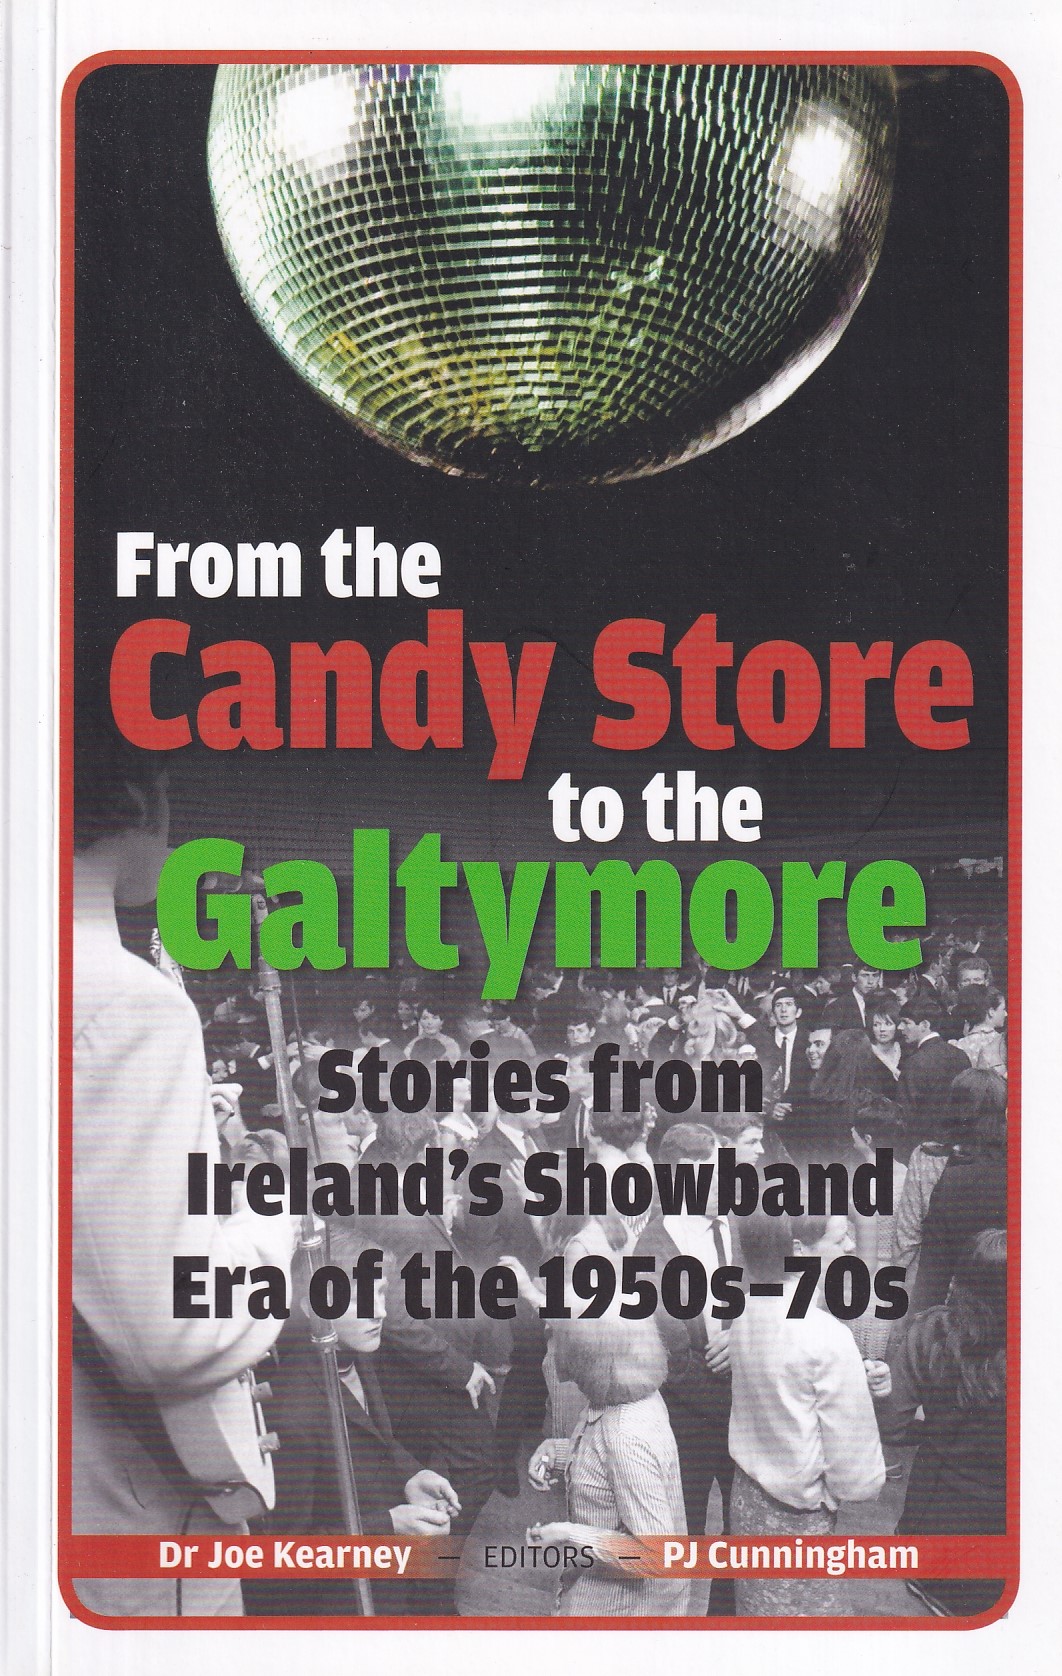 From the Candy Store to the Galtymore | Dr Joe Kearney & PJ Cunningham (eds.) | Charlie Byrne's